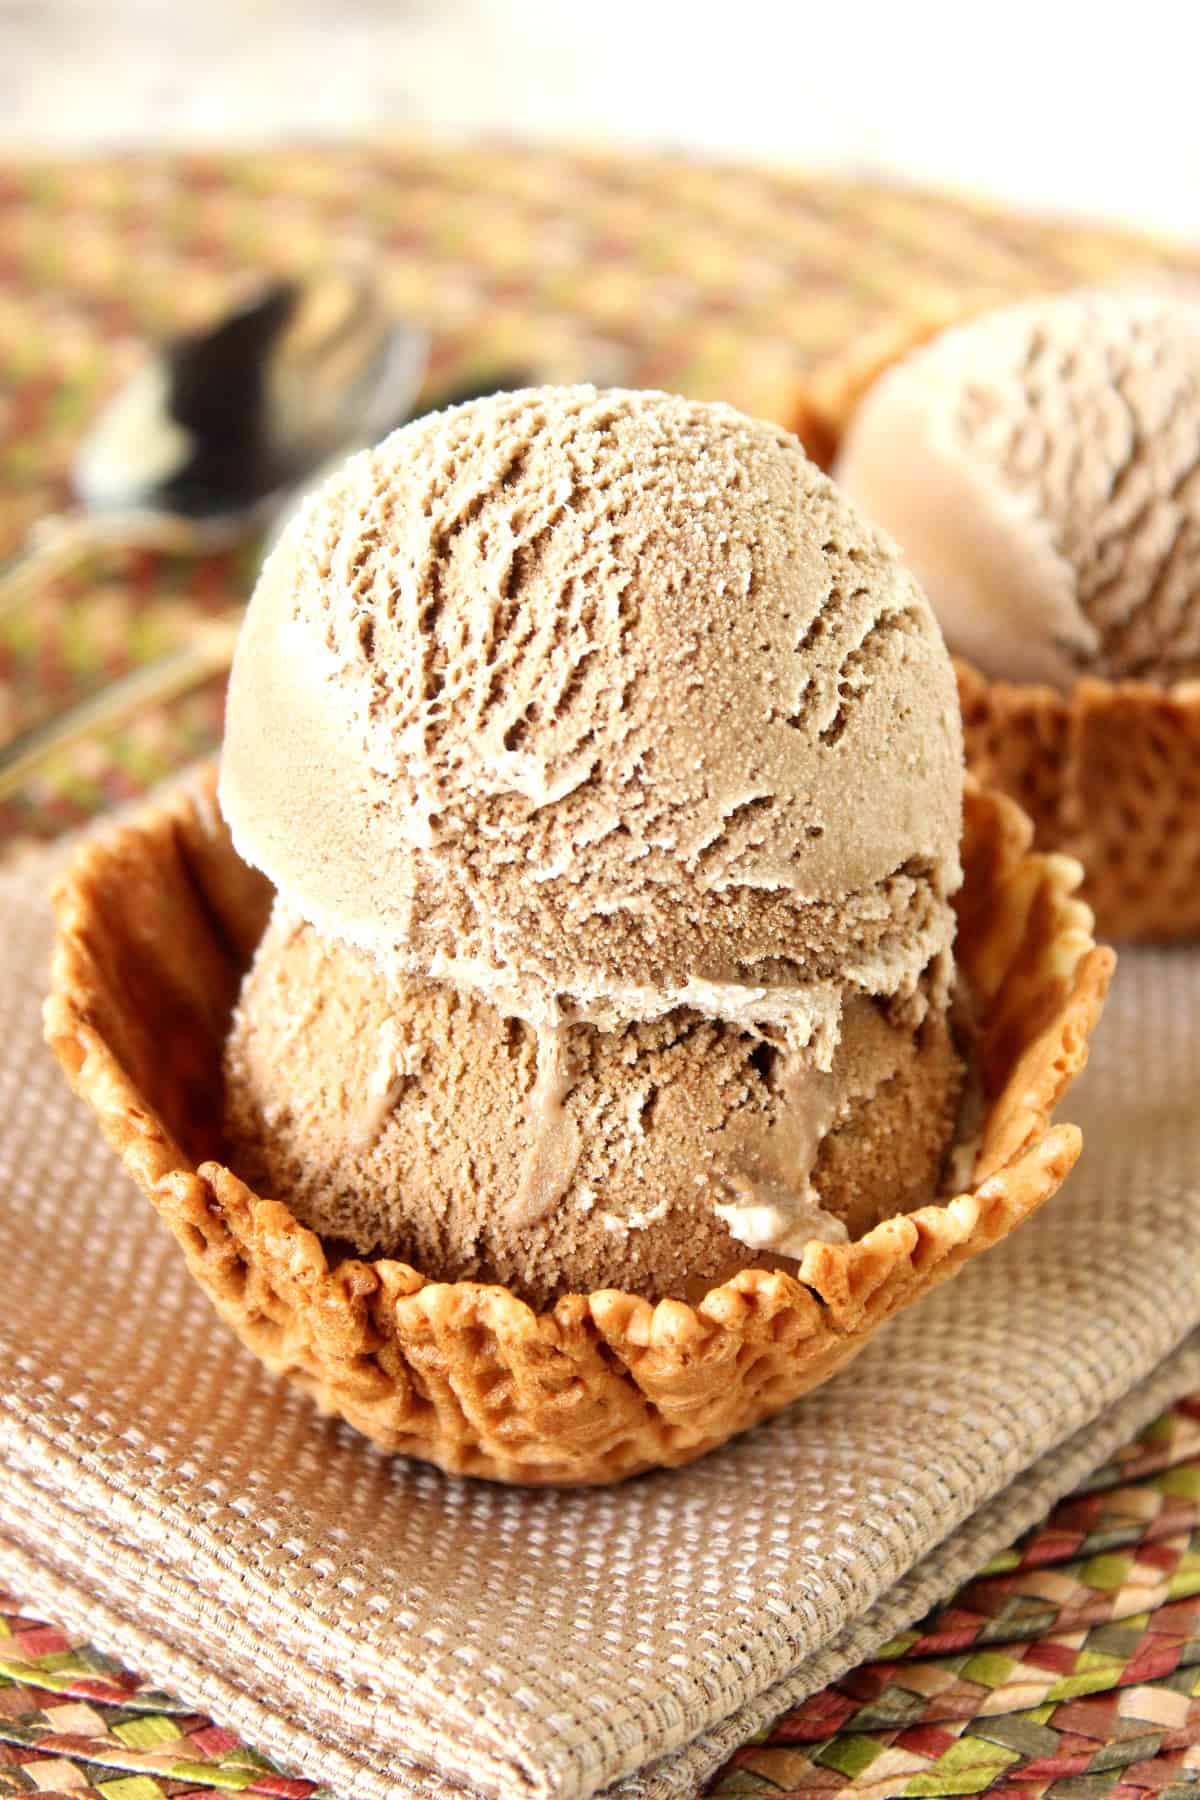 Two scoops of Root Beer Ice Cream in a waffle cone bowl.